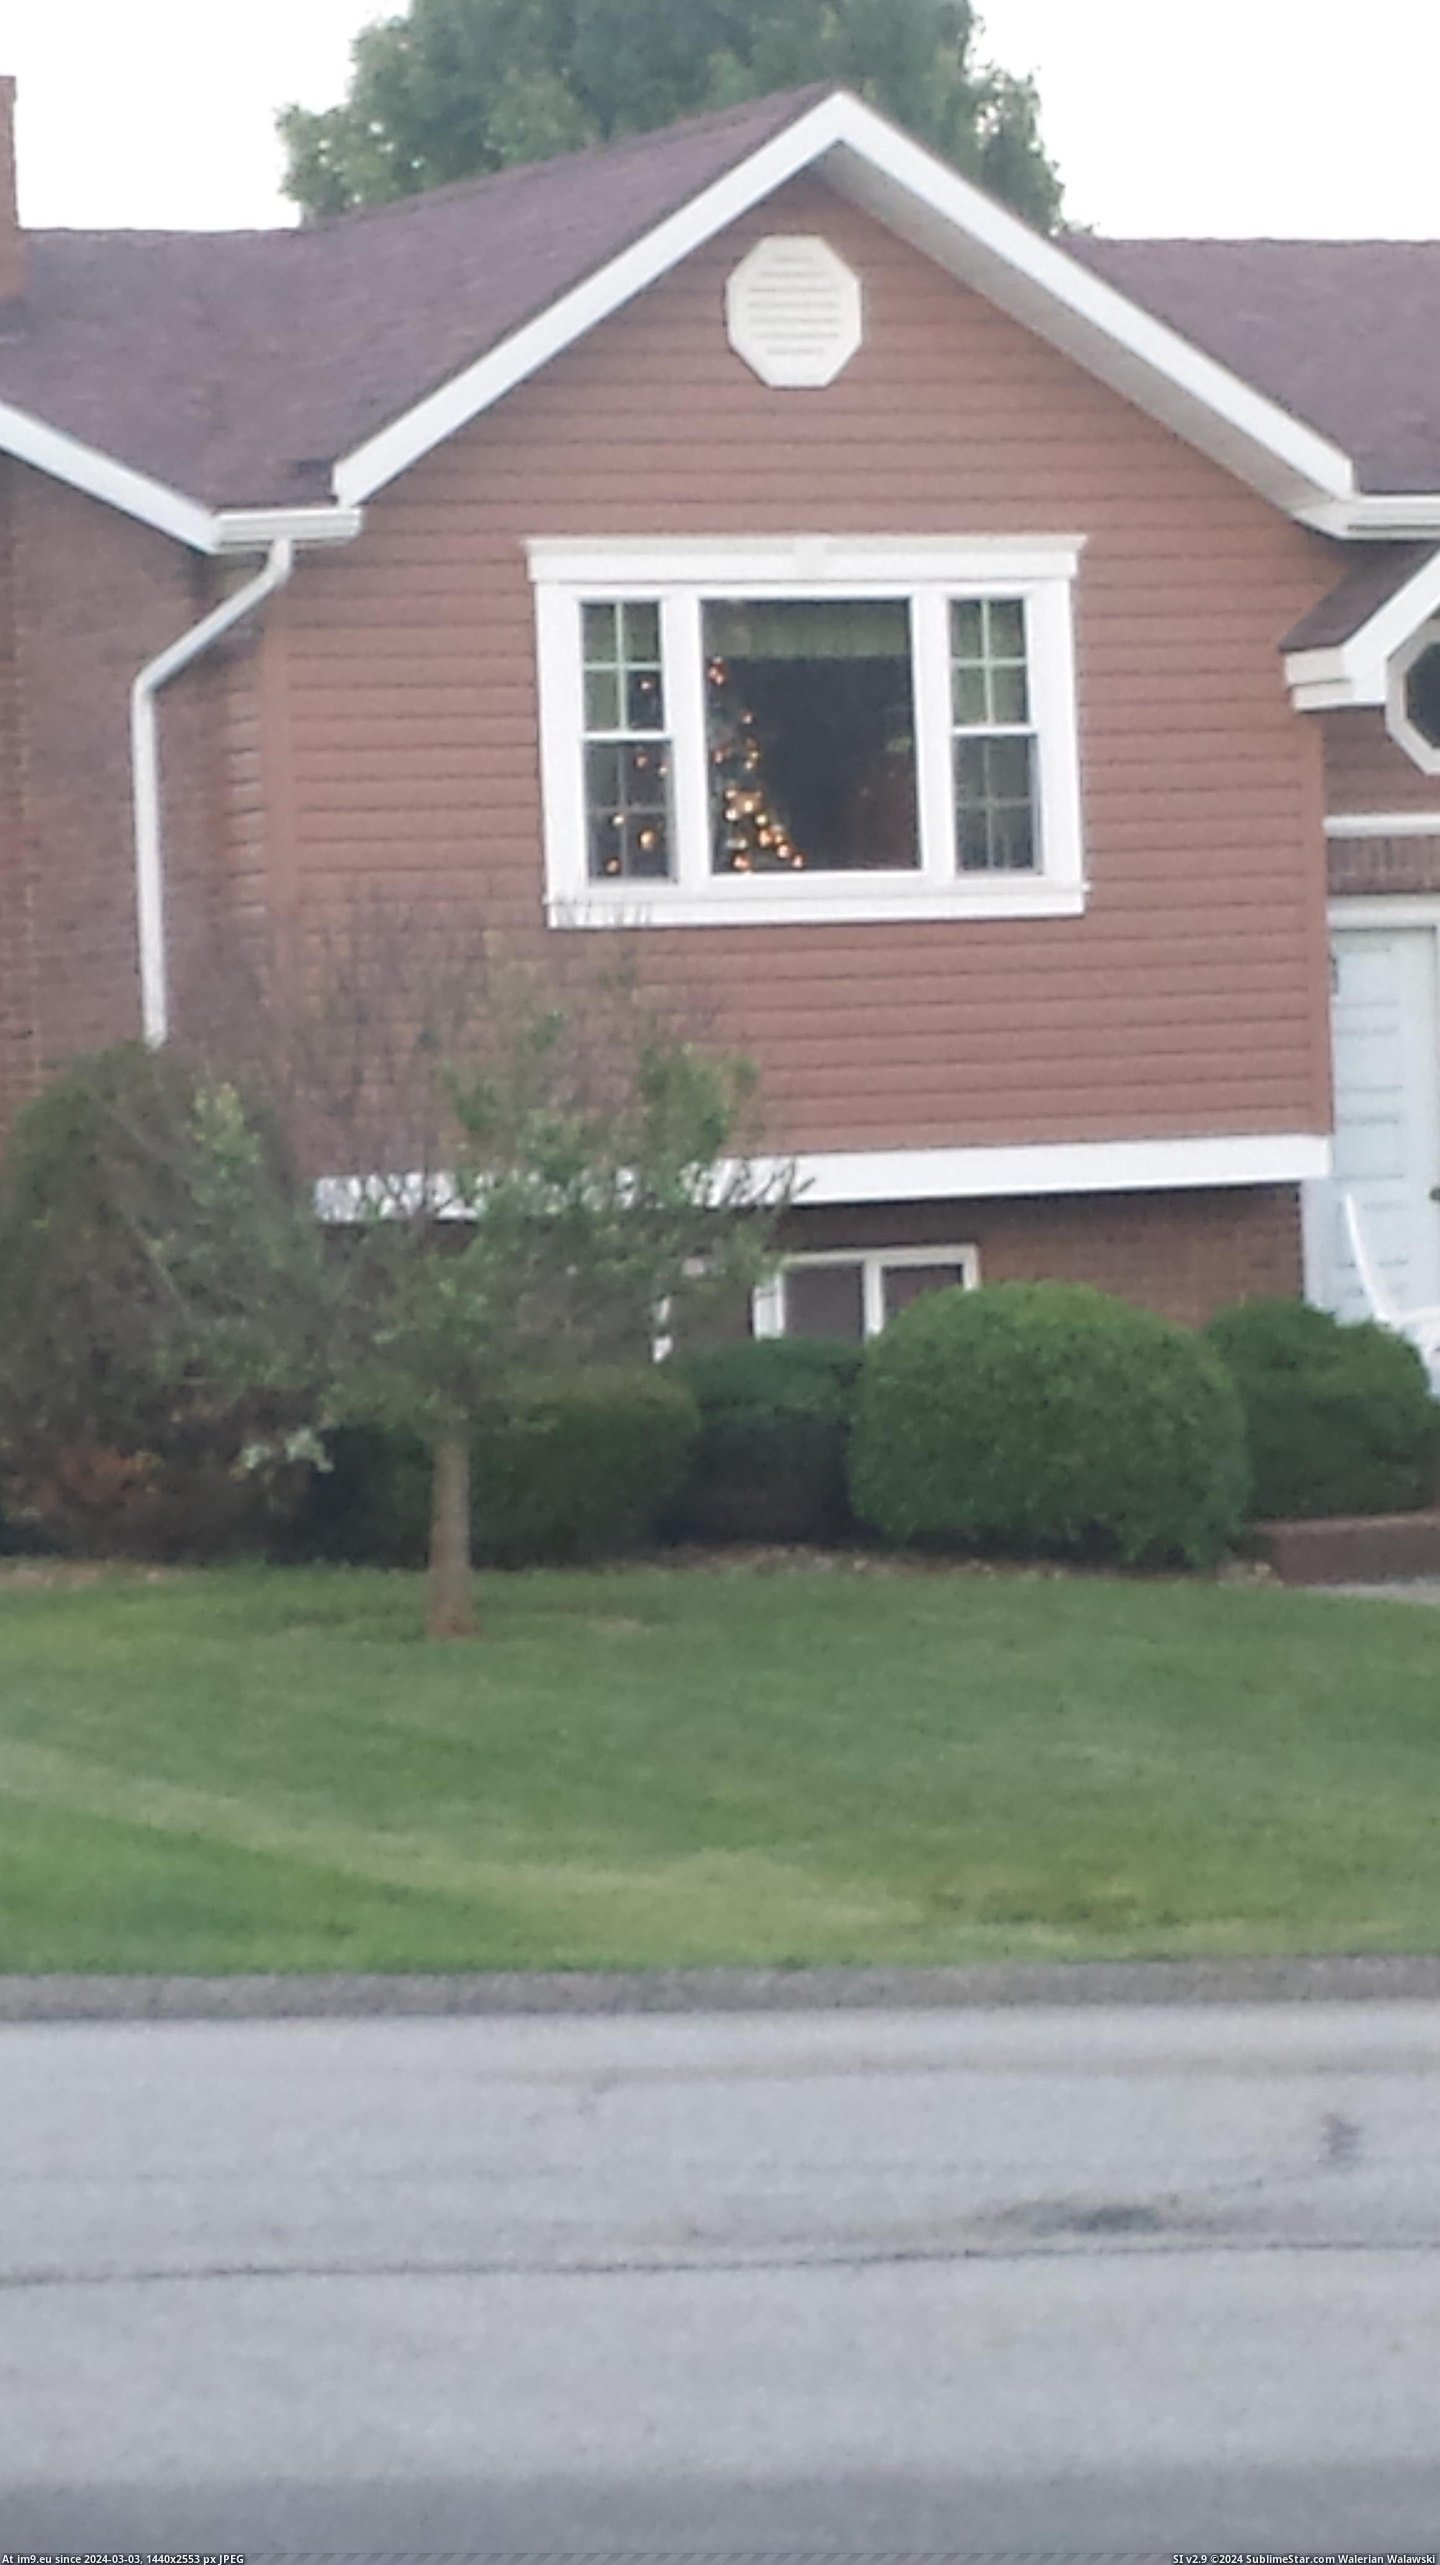 #Funny #Christmas #6th #Ornaments #Tree #Neighbors [Funny] It is June 6th. My neighbors still have their Christmas tree up...with Christmas ornaments on it. Pic. (Image of album My r/FUNNY favs))